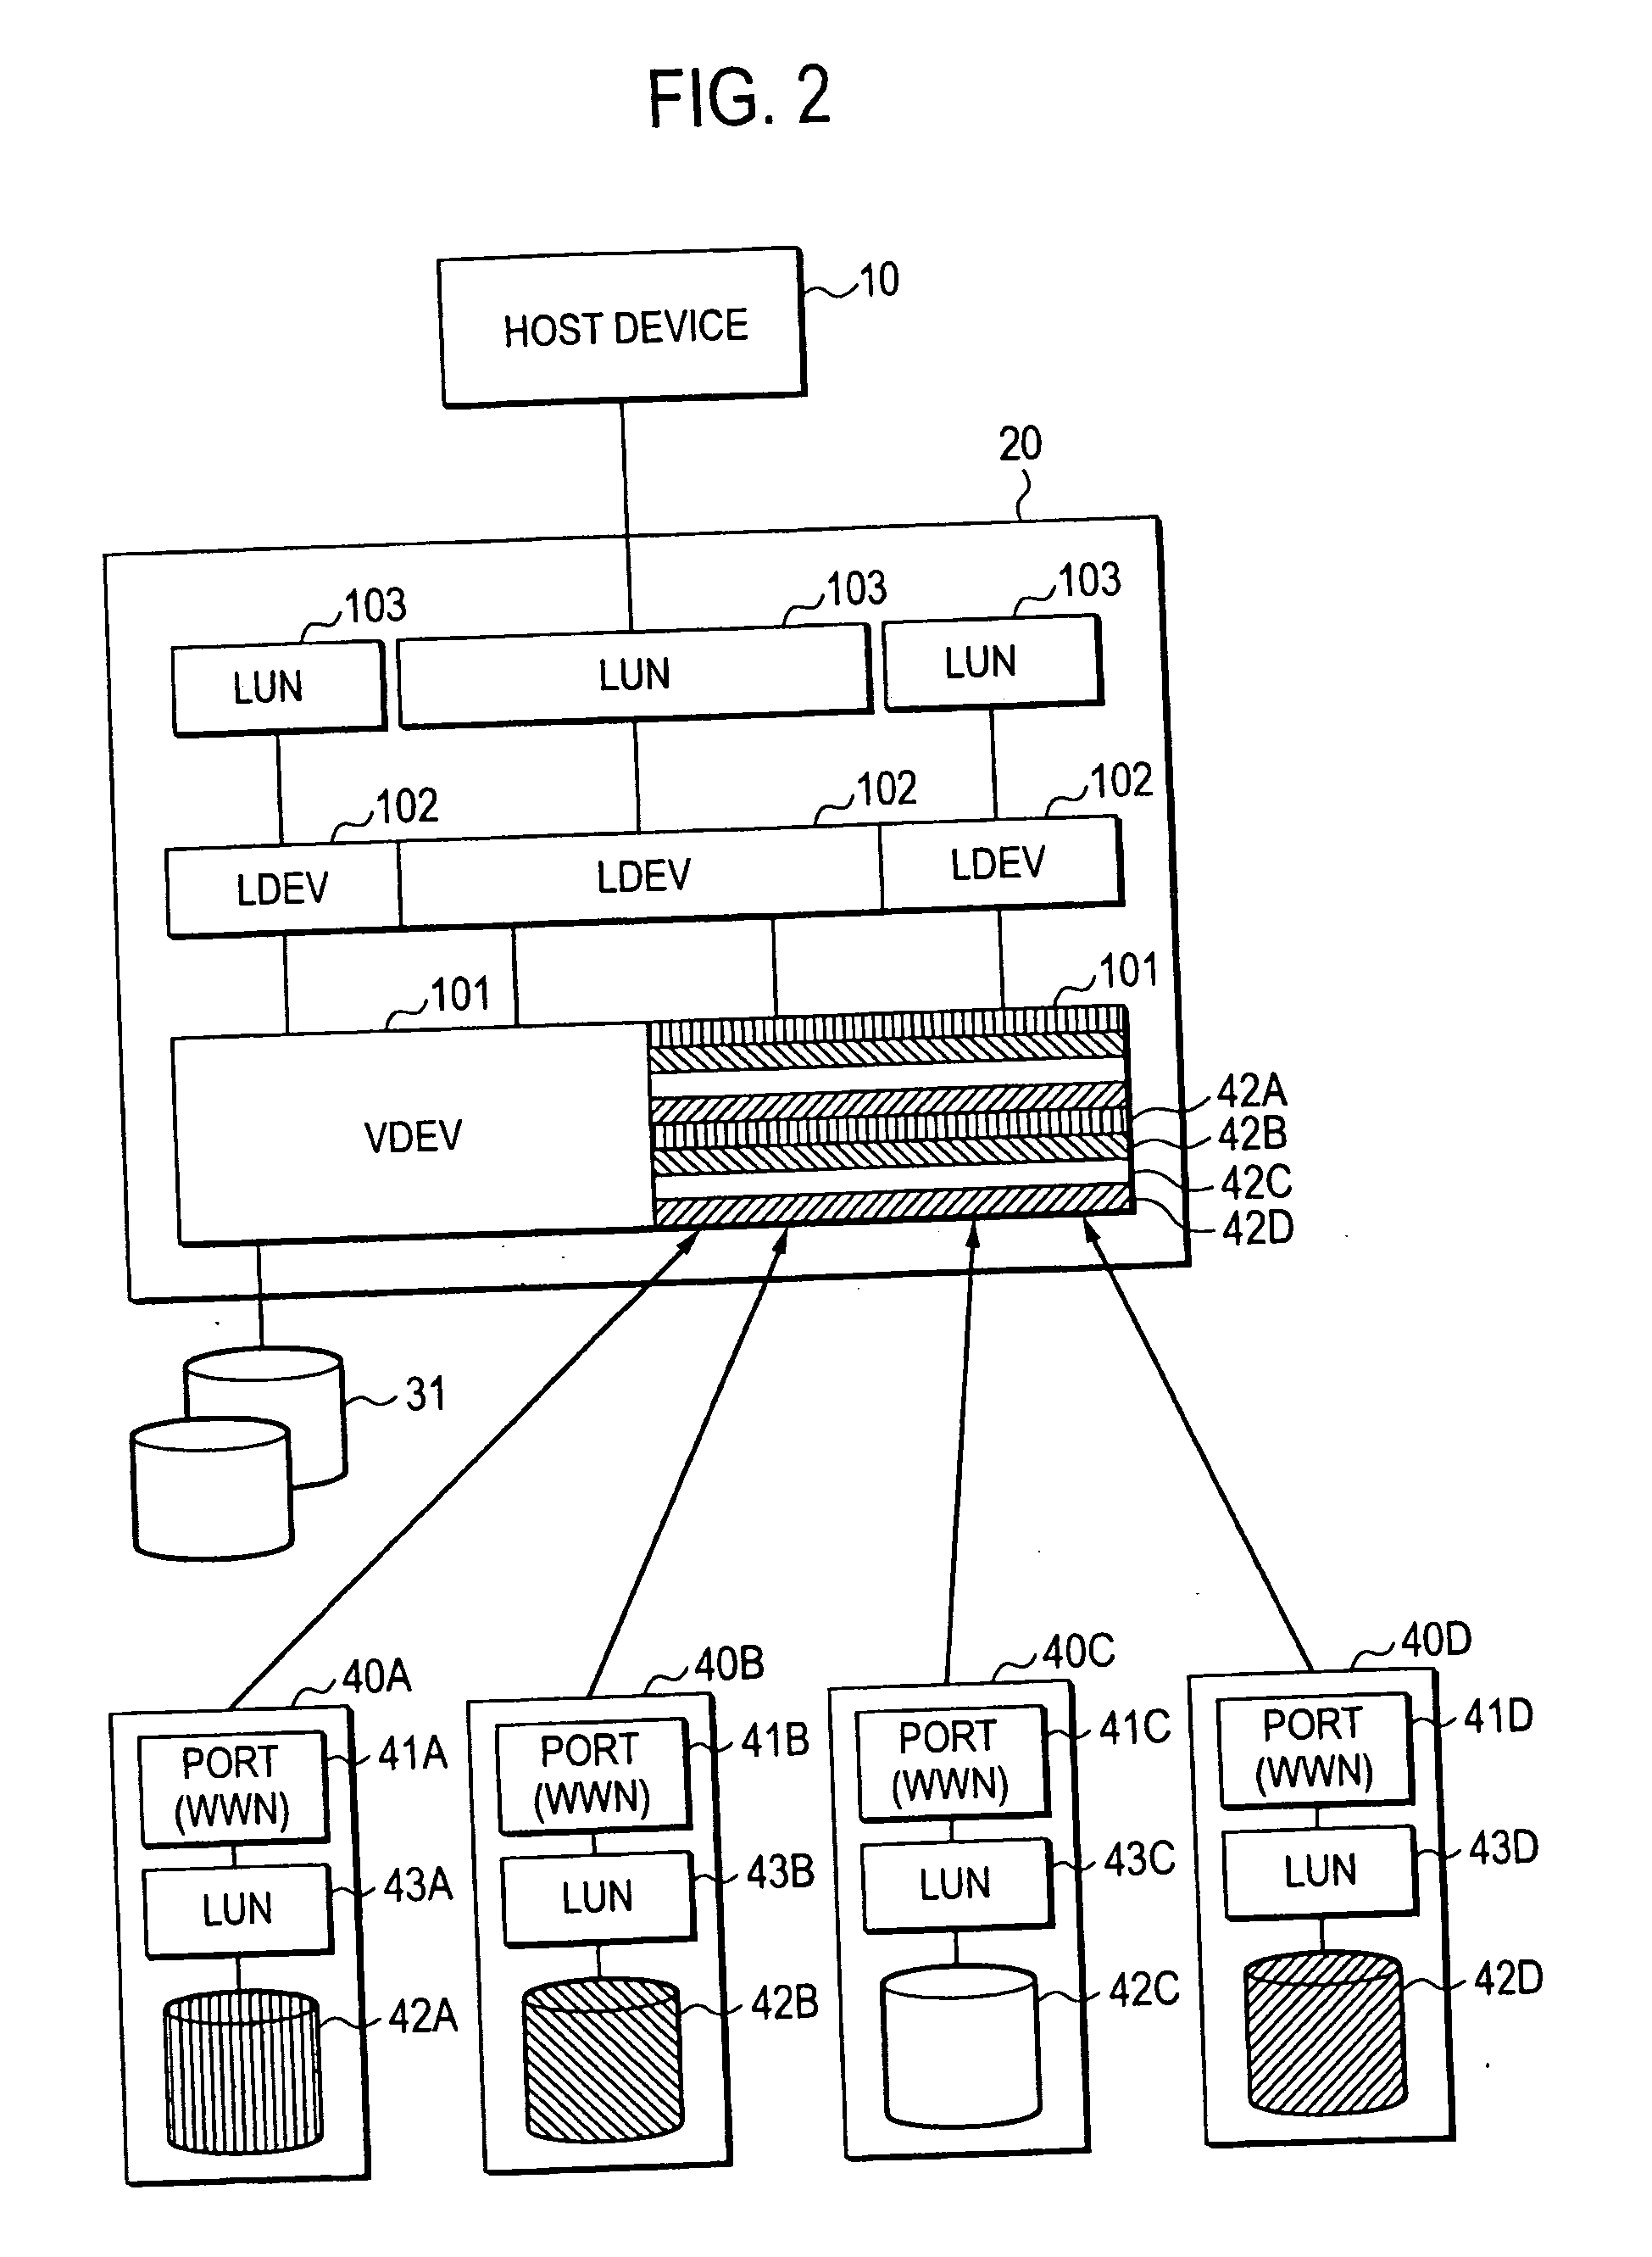 Storage system and storage controller